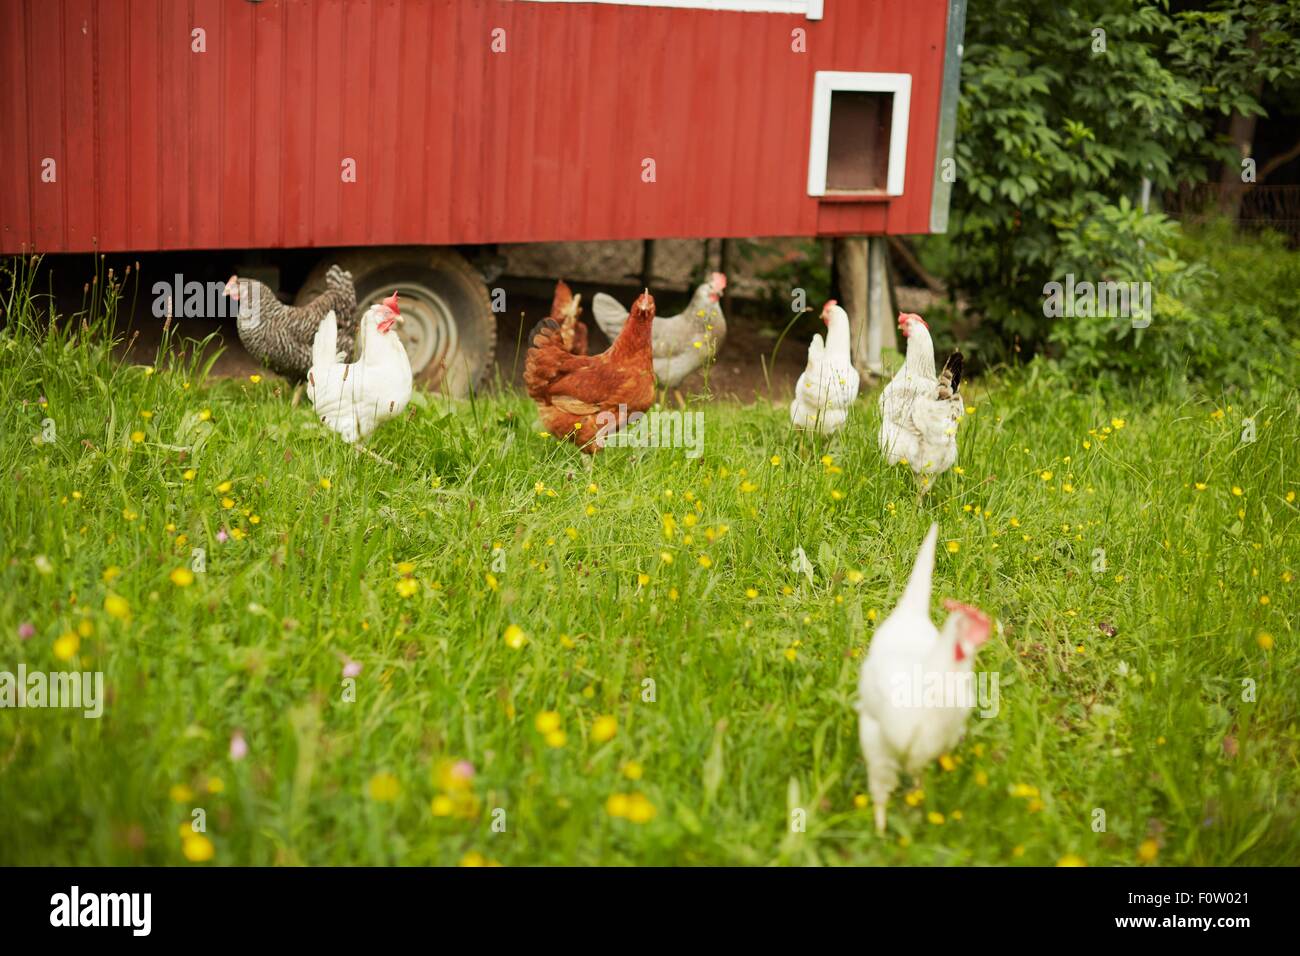 Field with free range hens and chicken coop Stock Photo